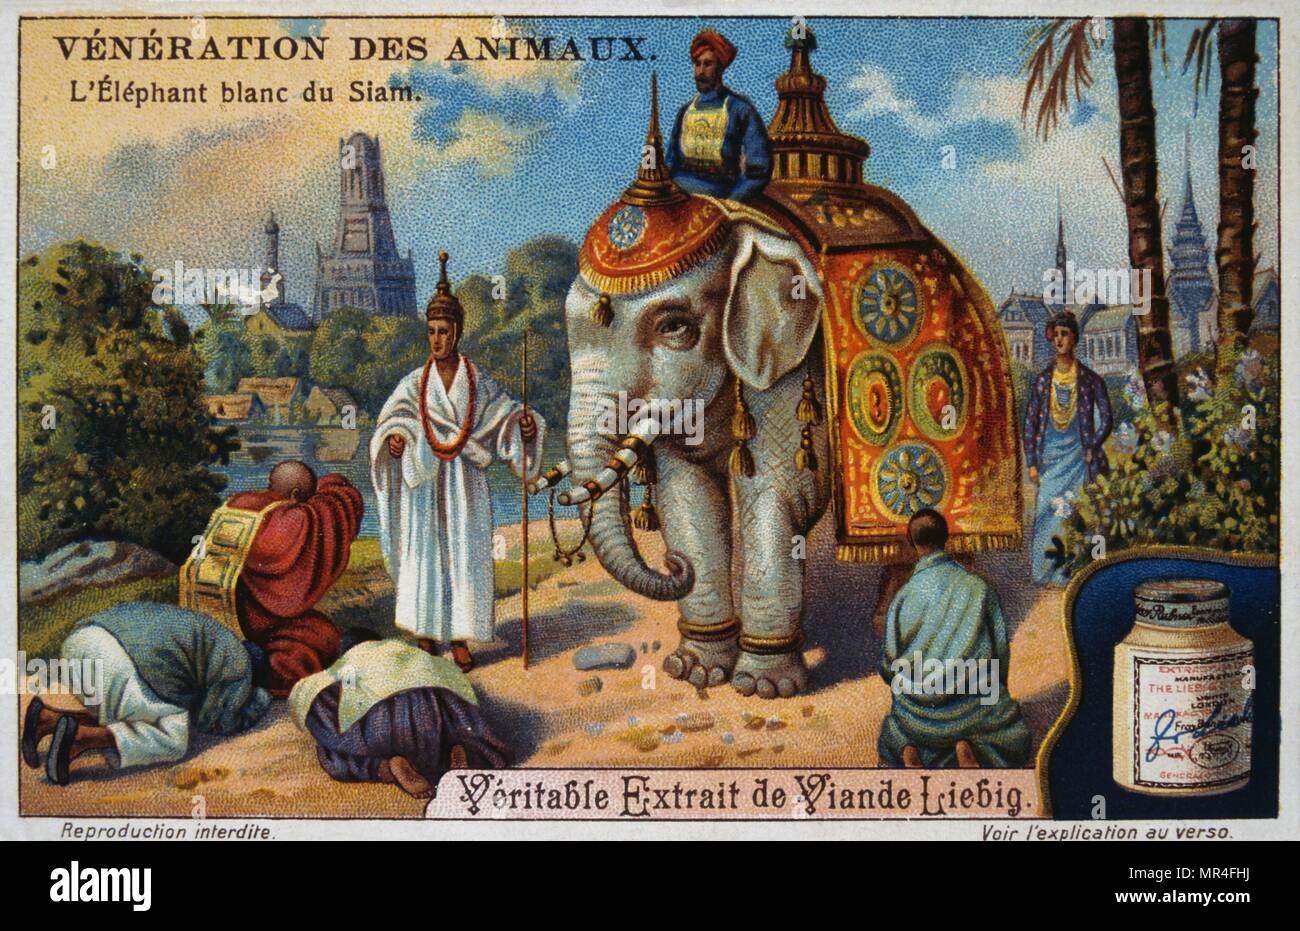 Leibig card showing a Siamese White Elephant at a ceremony in Siam (Thailand), 1900.  sacred white elephants kept by Southeast Asian monarchs in Burma, Thailand, Laos and Cambodia. To possess a white elephant was regarded (and is still regarded in Thailand and Burma) as a sign that the monarch reigned with justice and power, and that the kingdom was blessed with peace and prosperity. Stock Photo